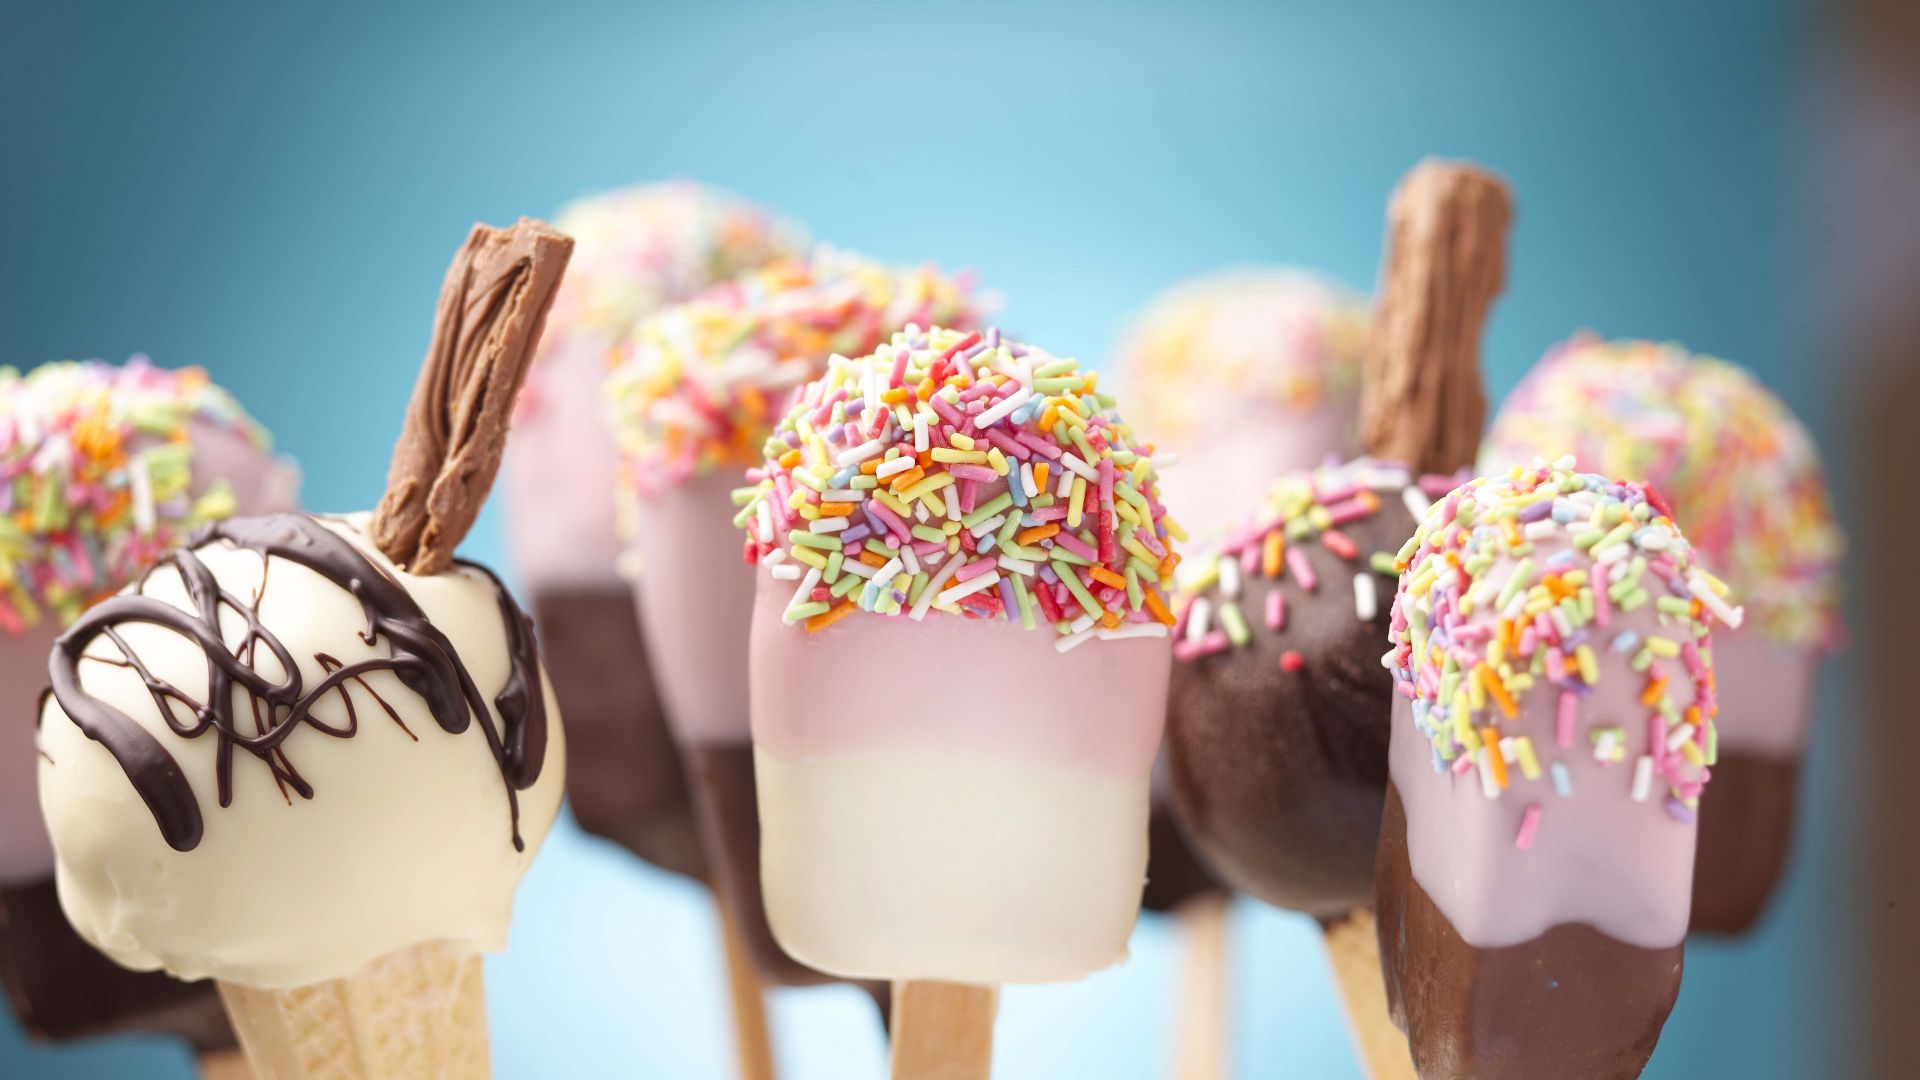 Desktop Wallpaper Ice Cream Candy Close Up HD Image Picture